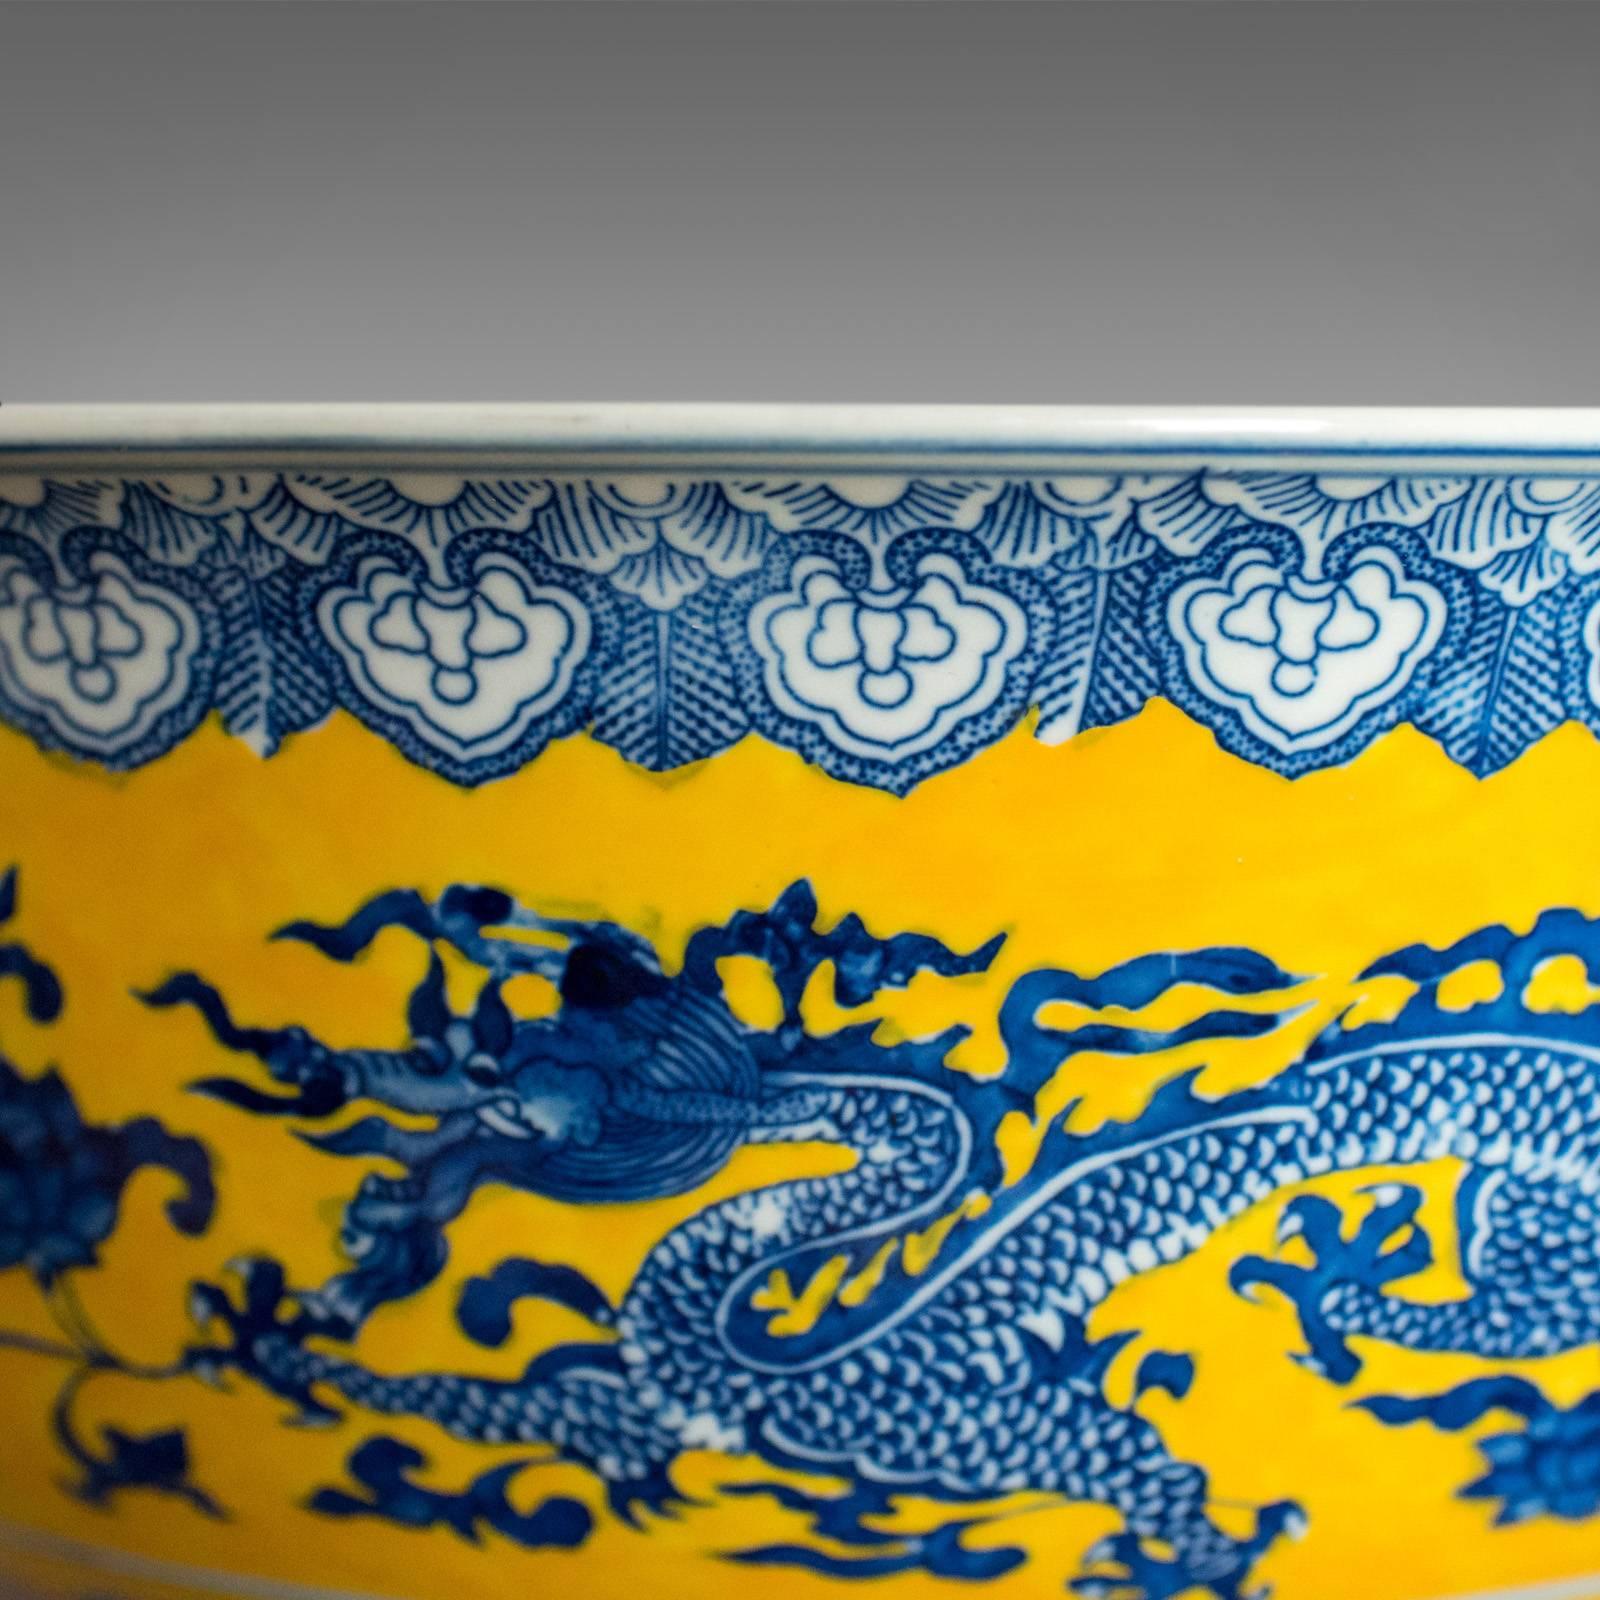 Chinese Export Chinese Porcelain Bowl, Dragons, Blue, White and Yellow, Late 20th Century